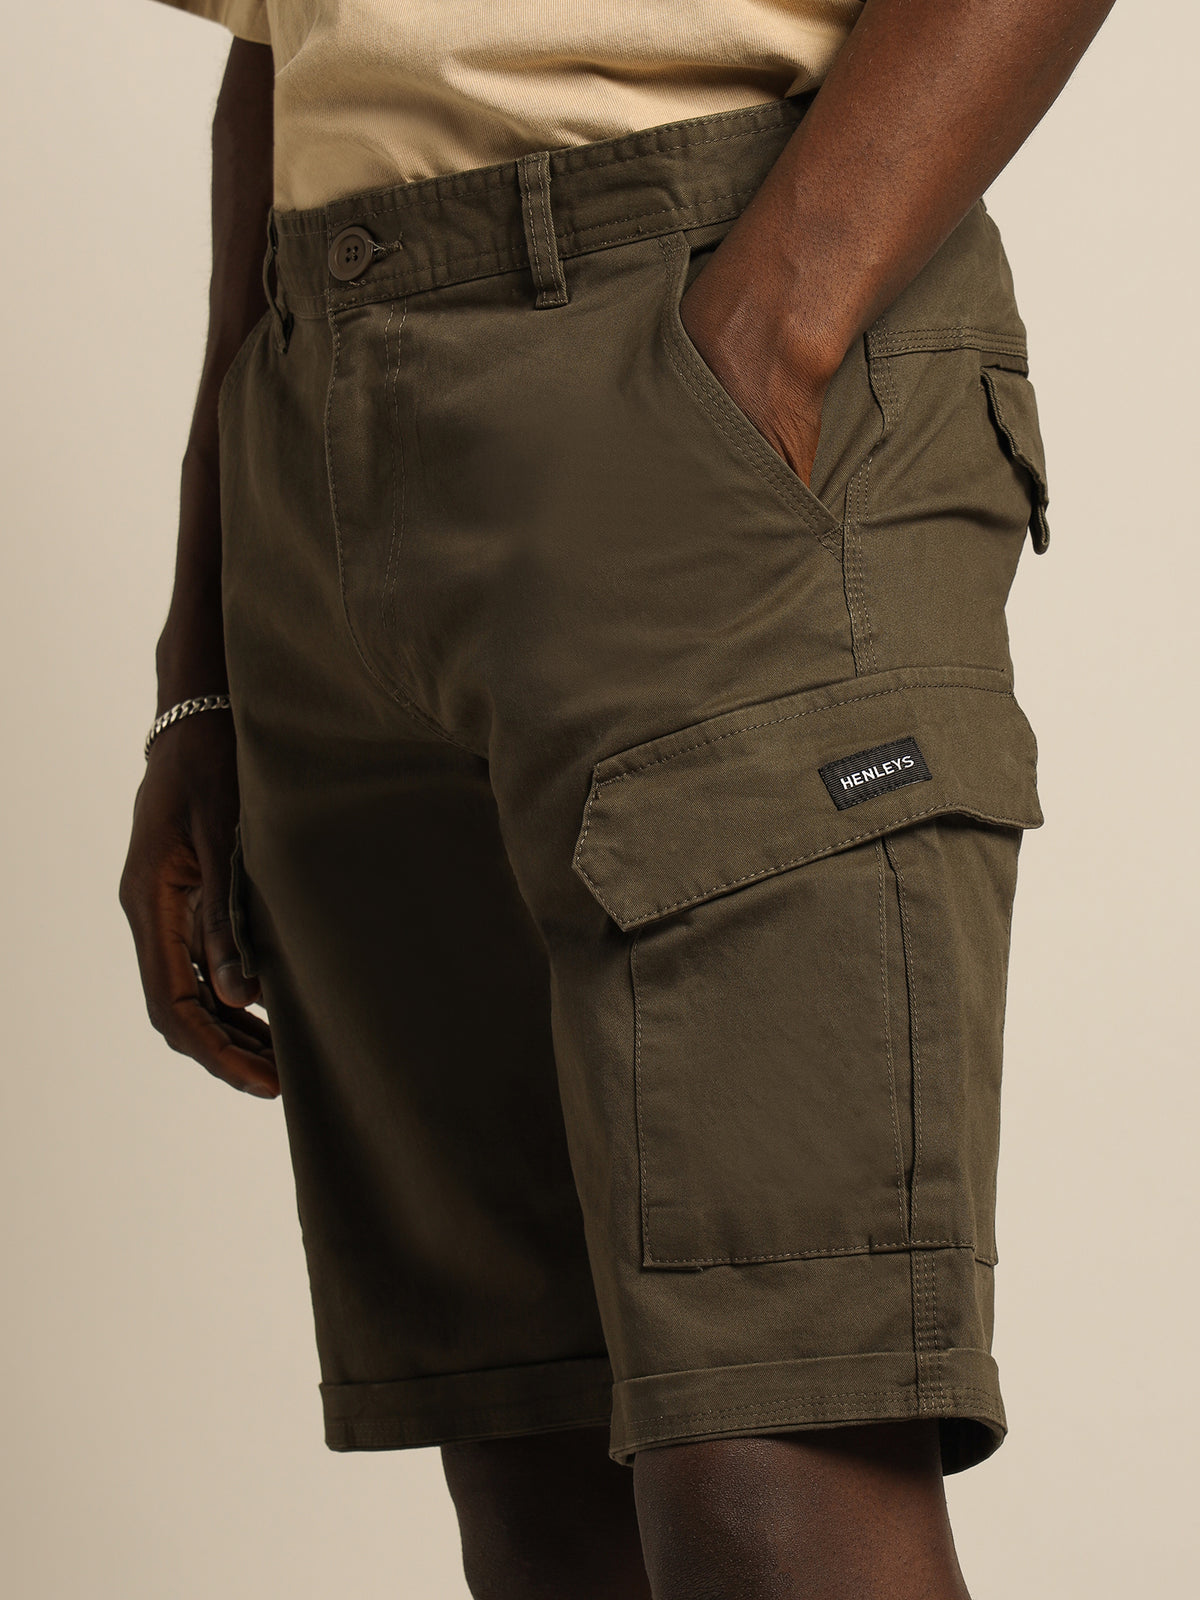 Lucas Combat Shorts in Army